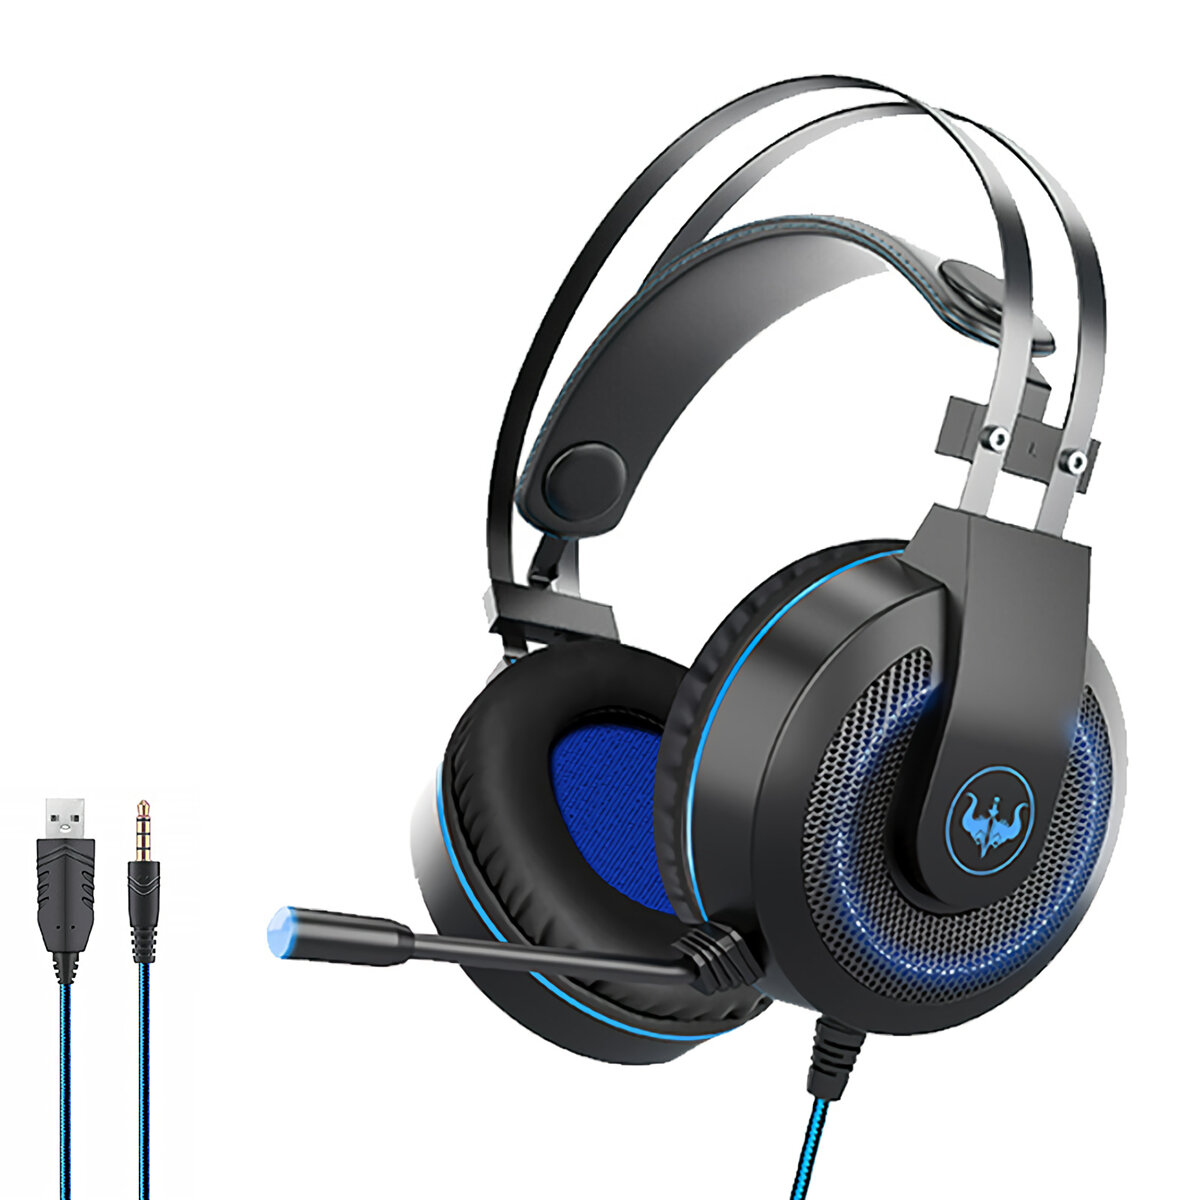 

OVLENG GT65 E-sport Gaming Headset Wired 3.5mm Jack 50mm Bass Stereo Sound LED Light Headphone with Mic for PS3/4 Comput